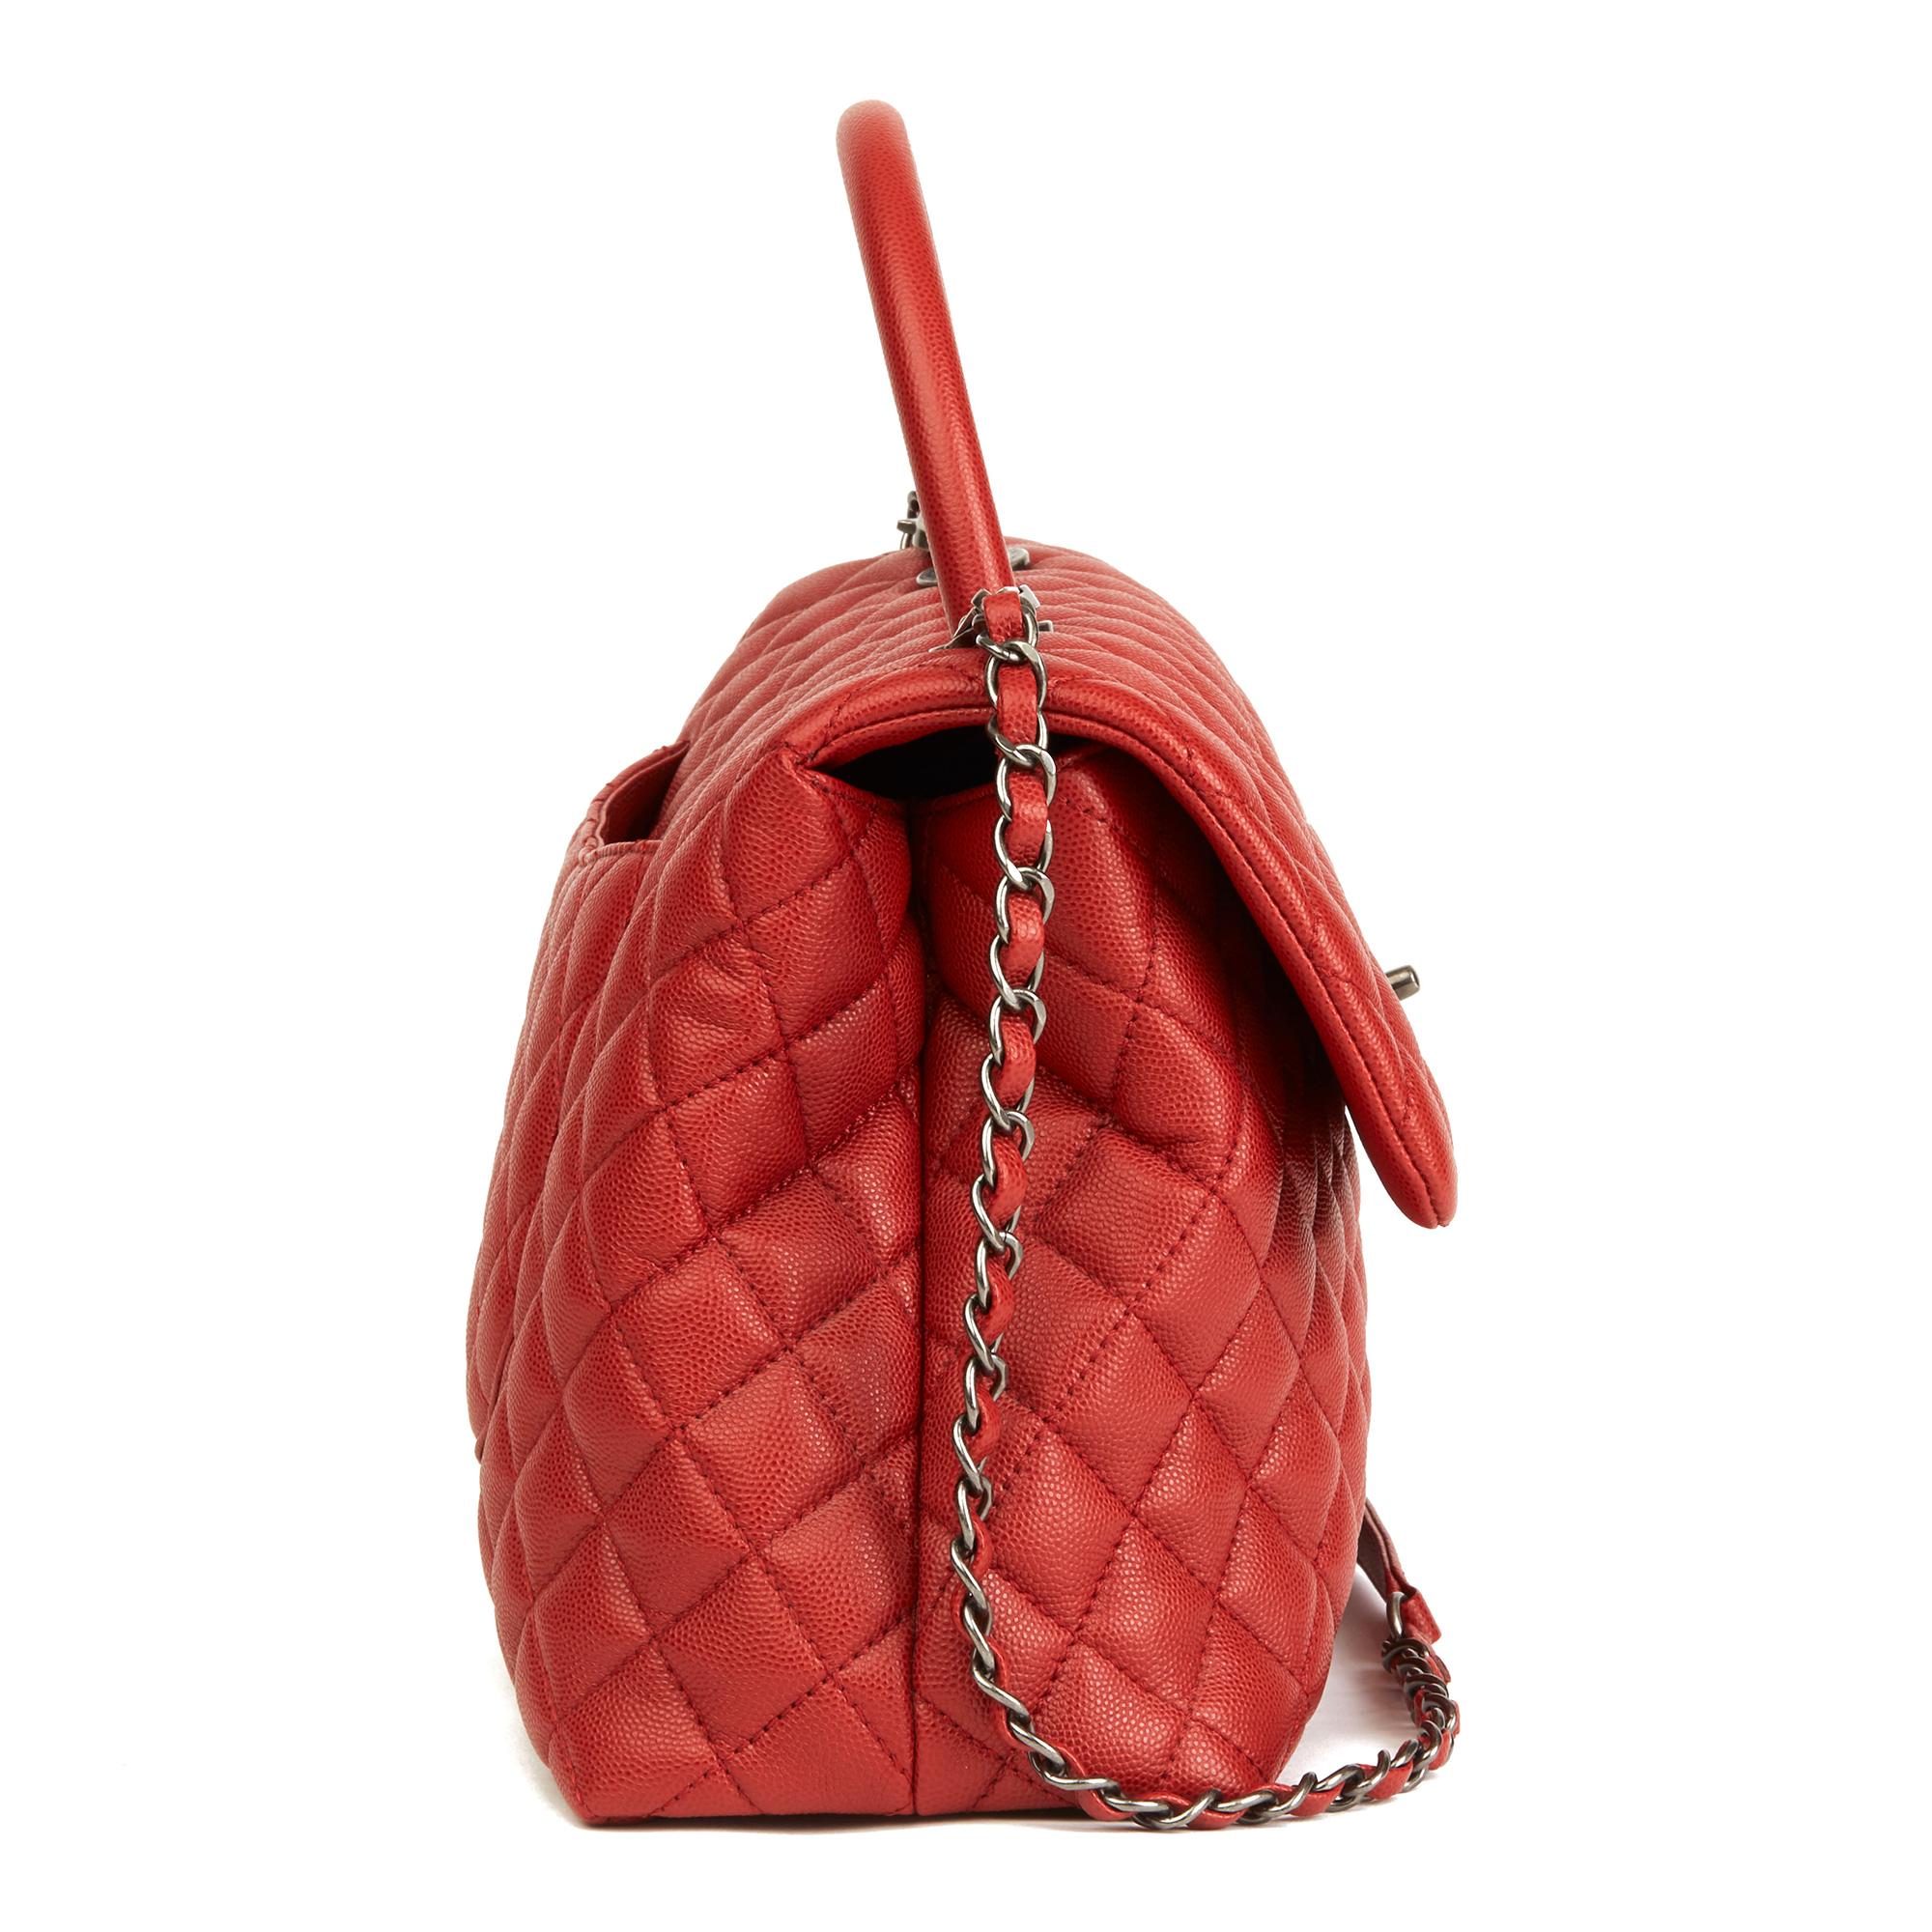 CHANEL
Red Quilted Caviar Leather Medium Coco Handle

Xupes Reference: HB2911
Serial Number: 23260301
Age (Circa): 2016
Accompanied By: Chanel Dust Bag, Authentity Card, Shoulder Strap, Invoice
Authenticity Details: Authenticity Card, Serial Sticker